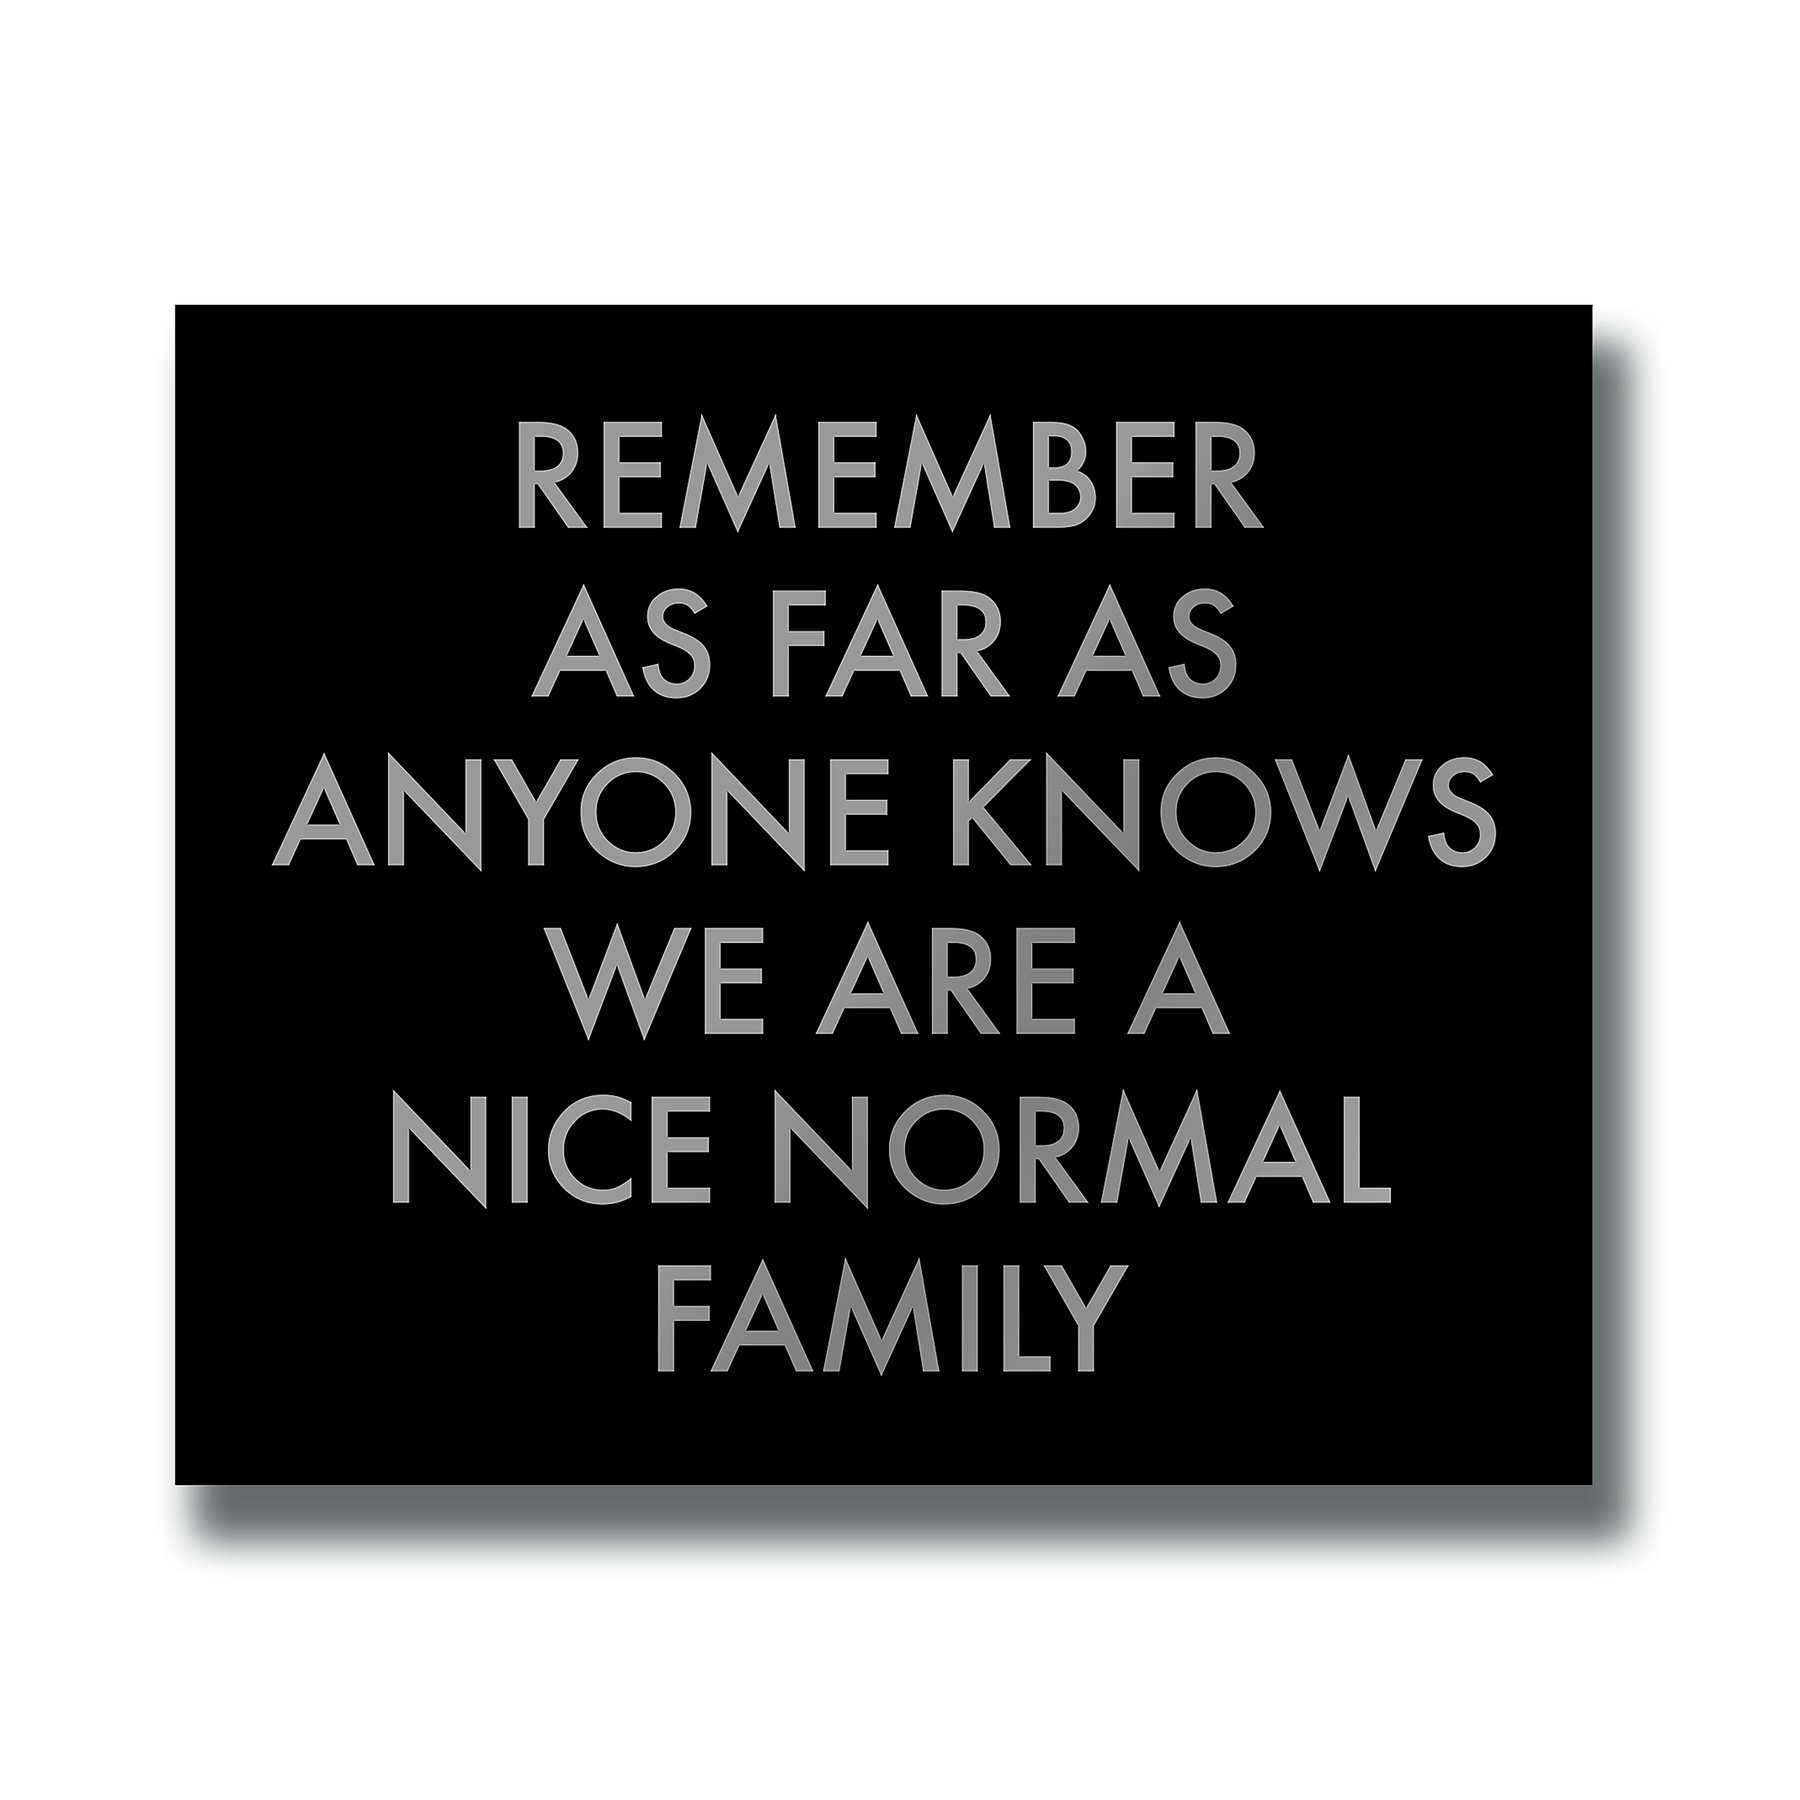 A Nice Normal Family Silver Foil Plaque